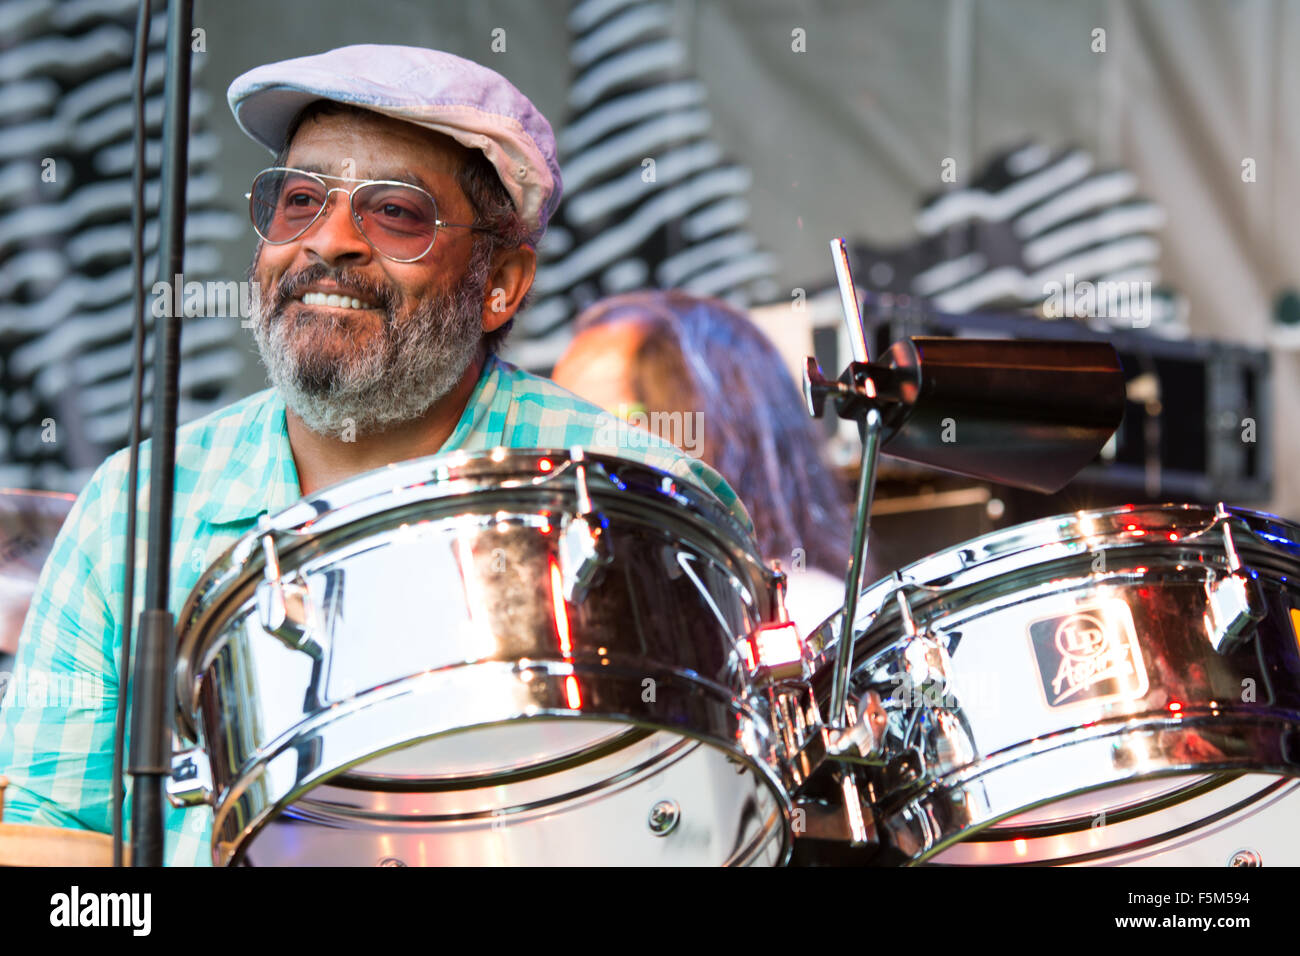 Garana, Romania, July 10, 2015: Percussionist Giovanni Hidalgo in concert at Garana Jazz festival, playing in the band of Gonzal Stock Photo